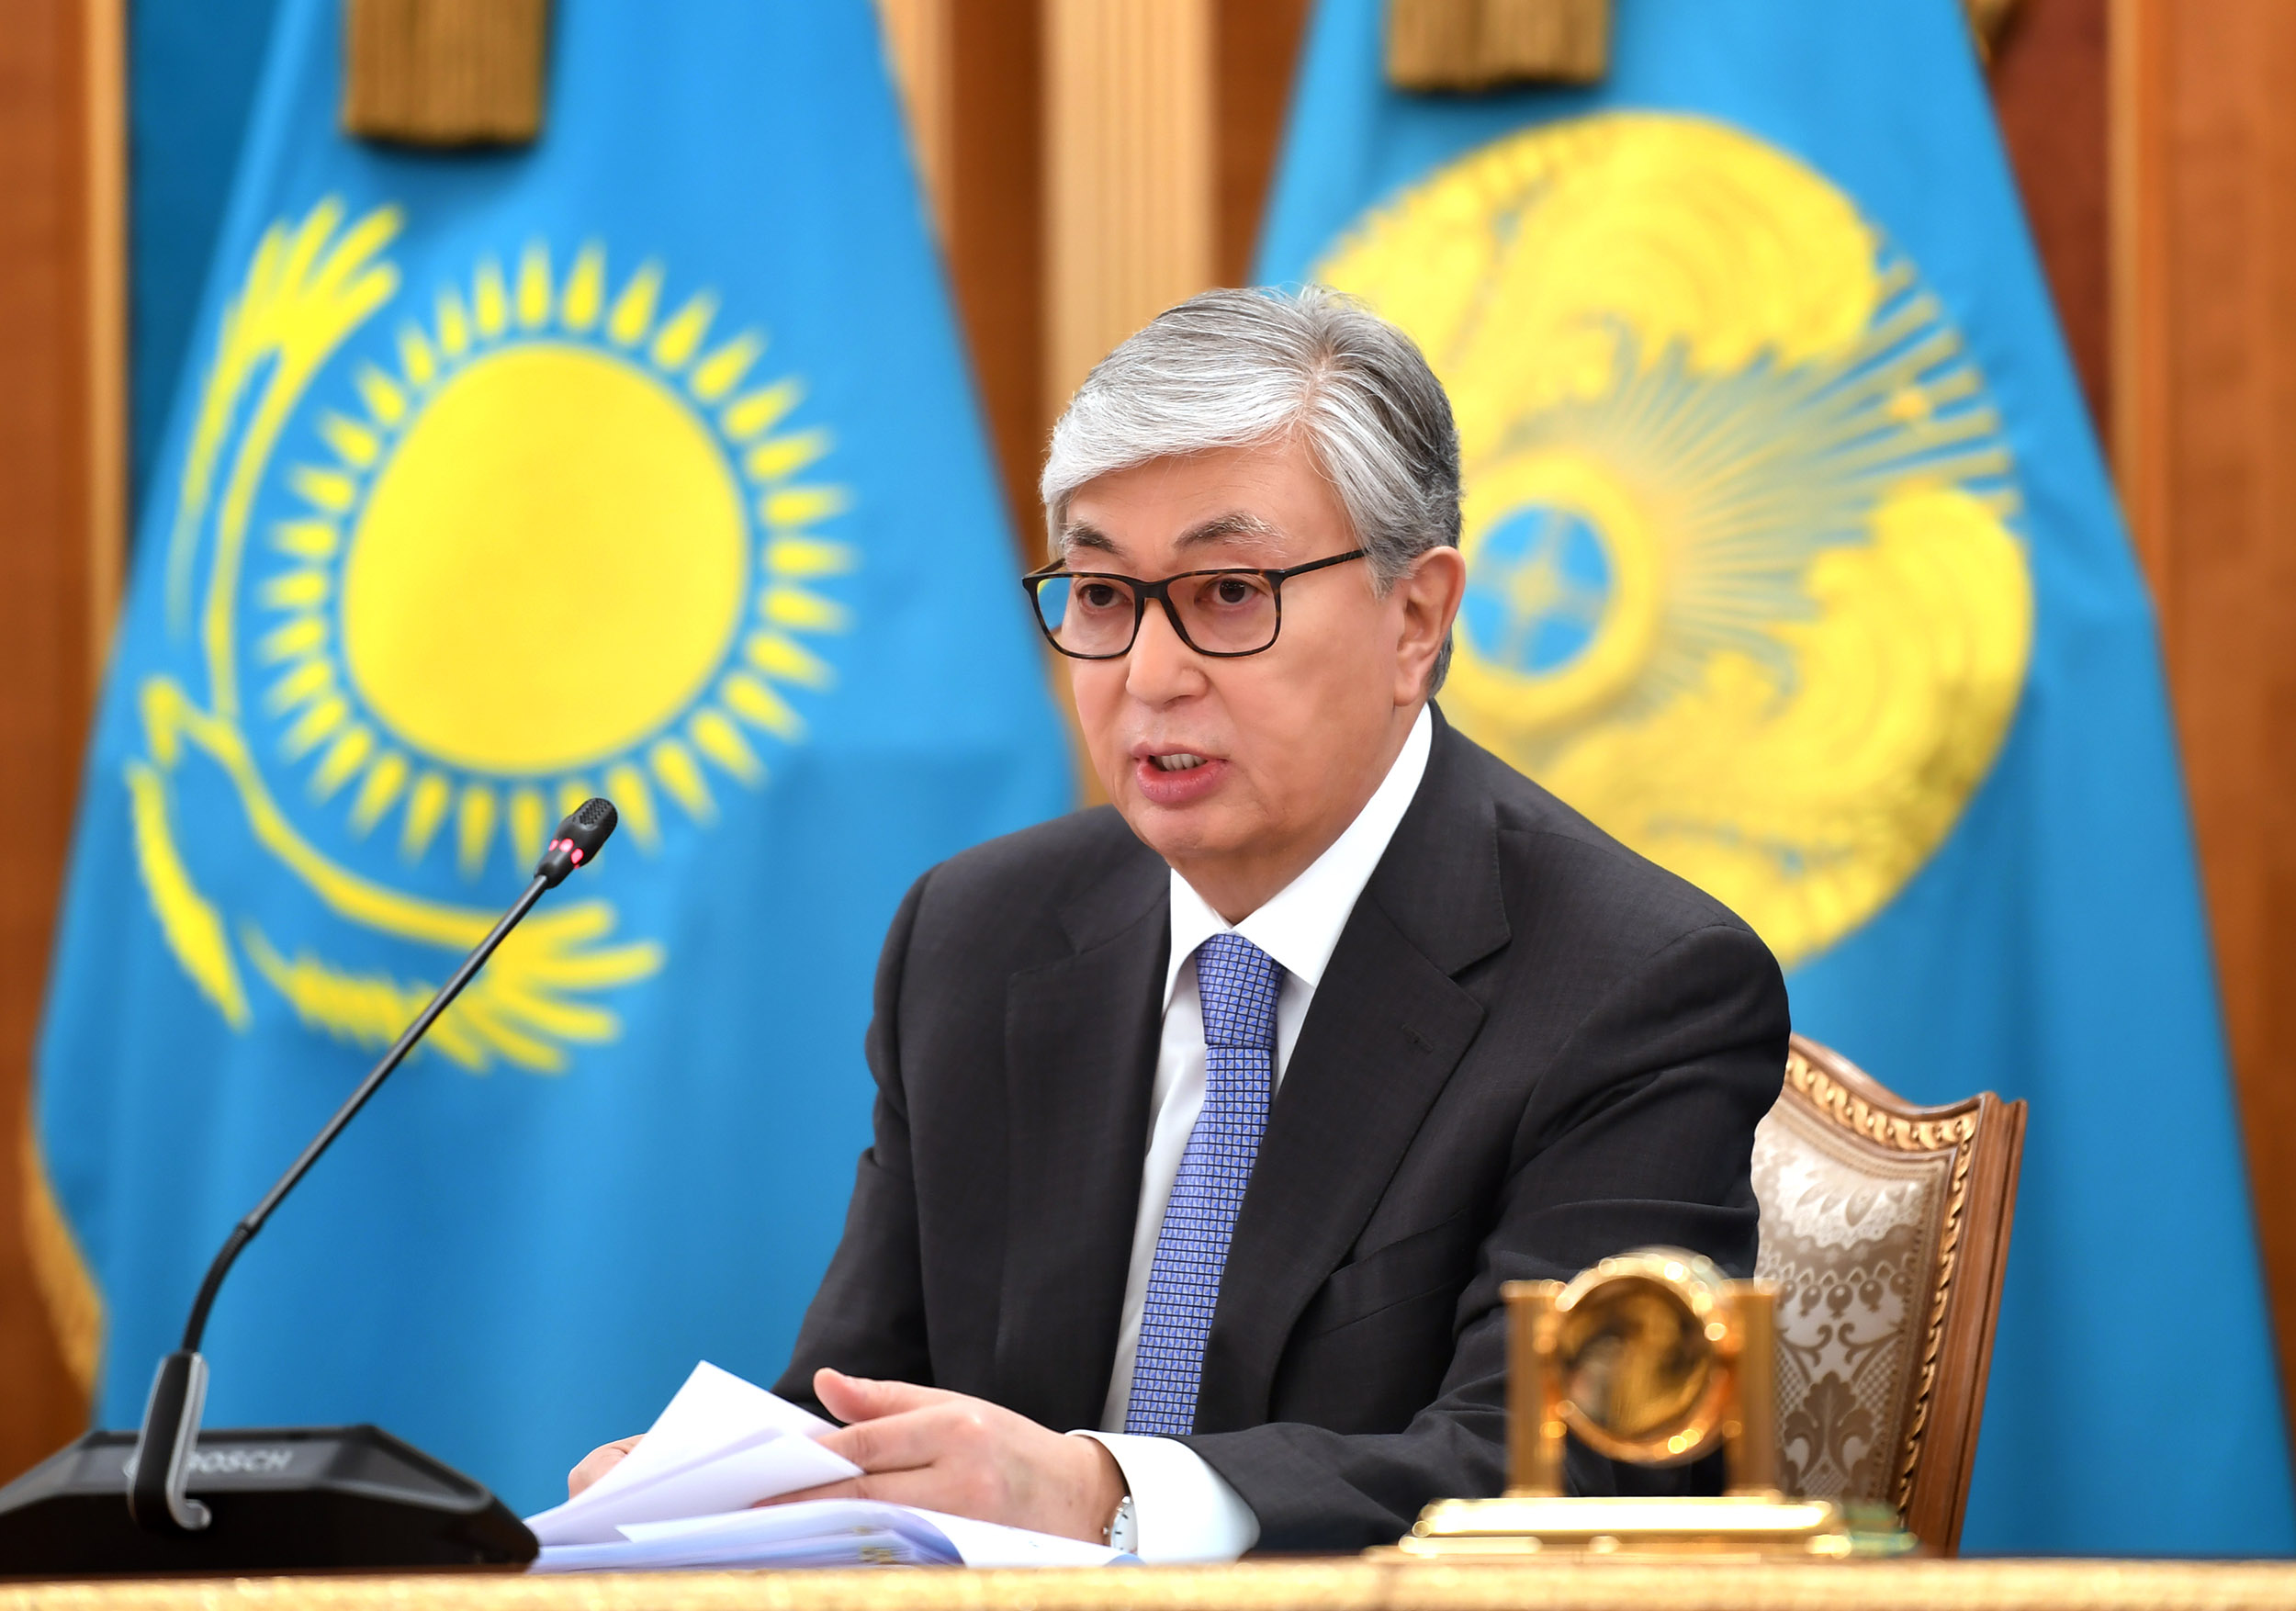 Kassym-Jomart Tokayev supports the challenge for snow removal